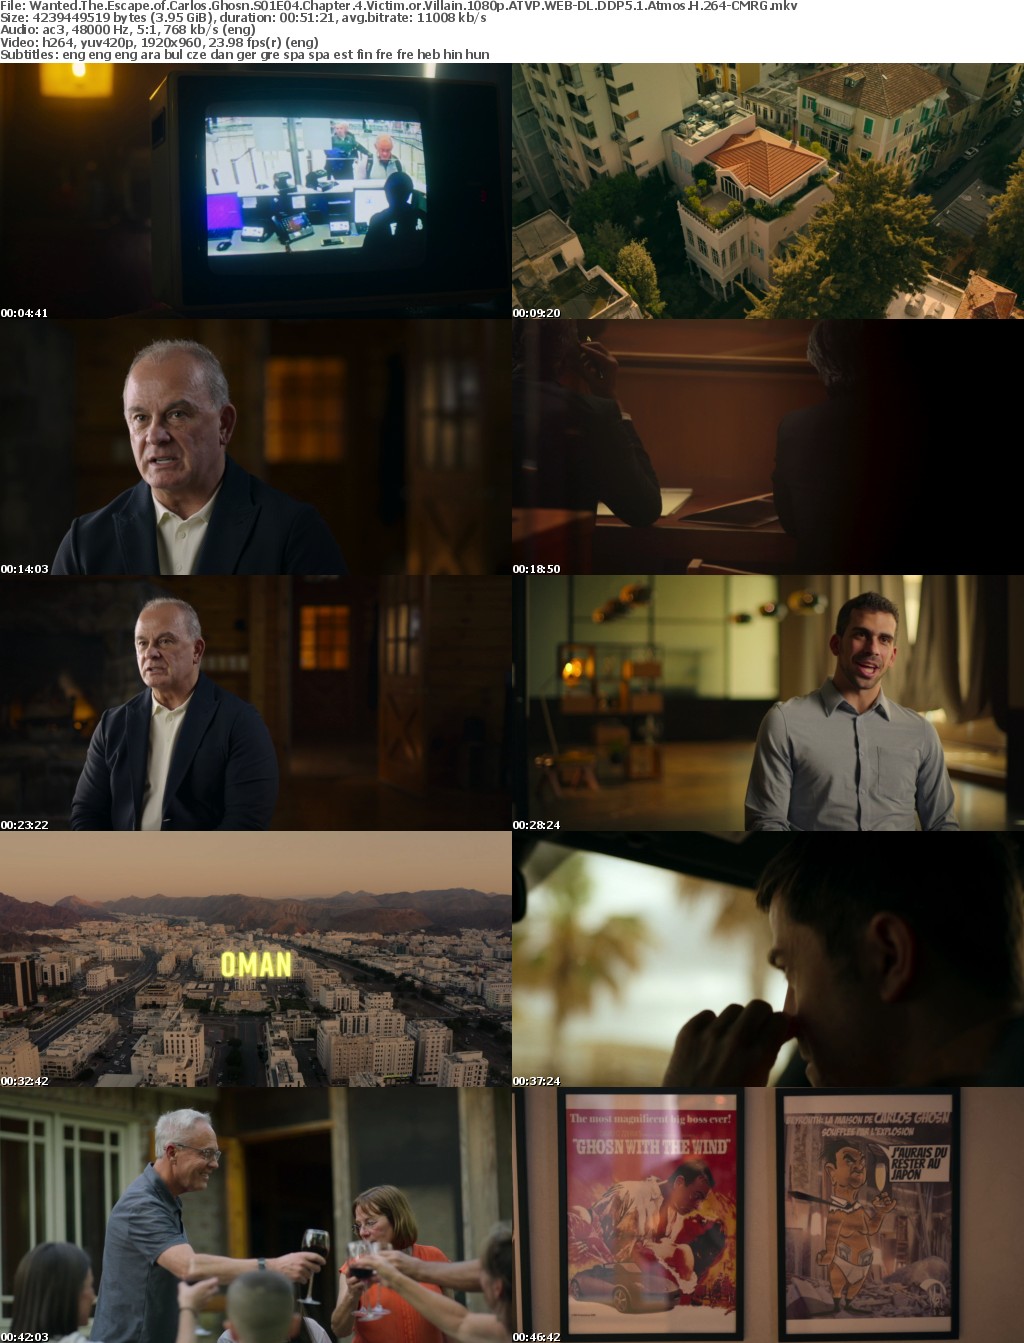 Wanted The Escape of Carlos Ghosn S01E04 Chapter 4 Victim or Villain 1080p ATVP WEB-DL DDP5 1 Atmos H 264-CMRG